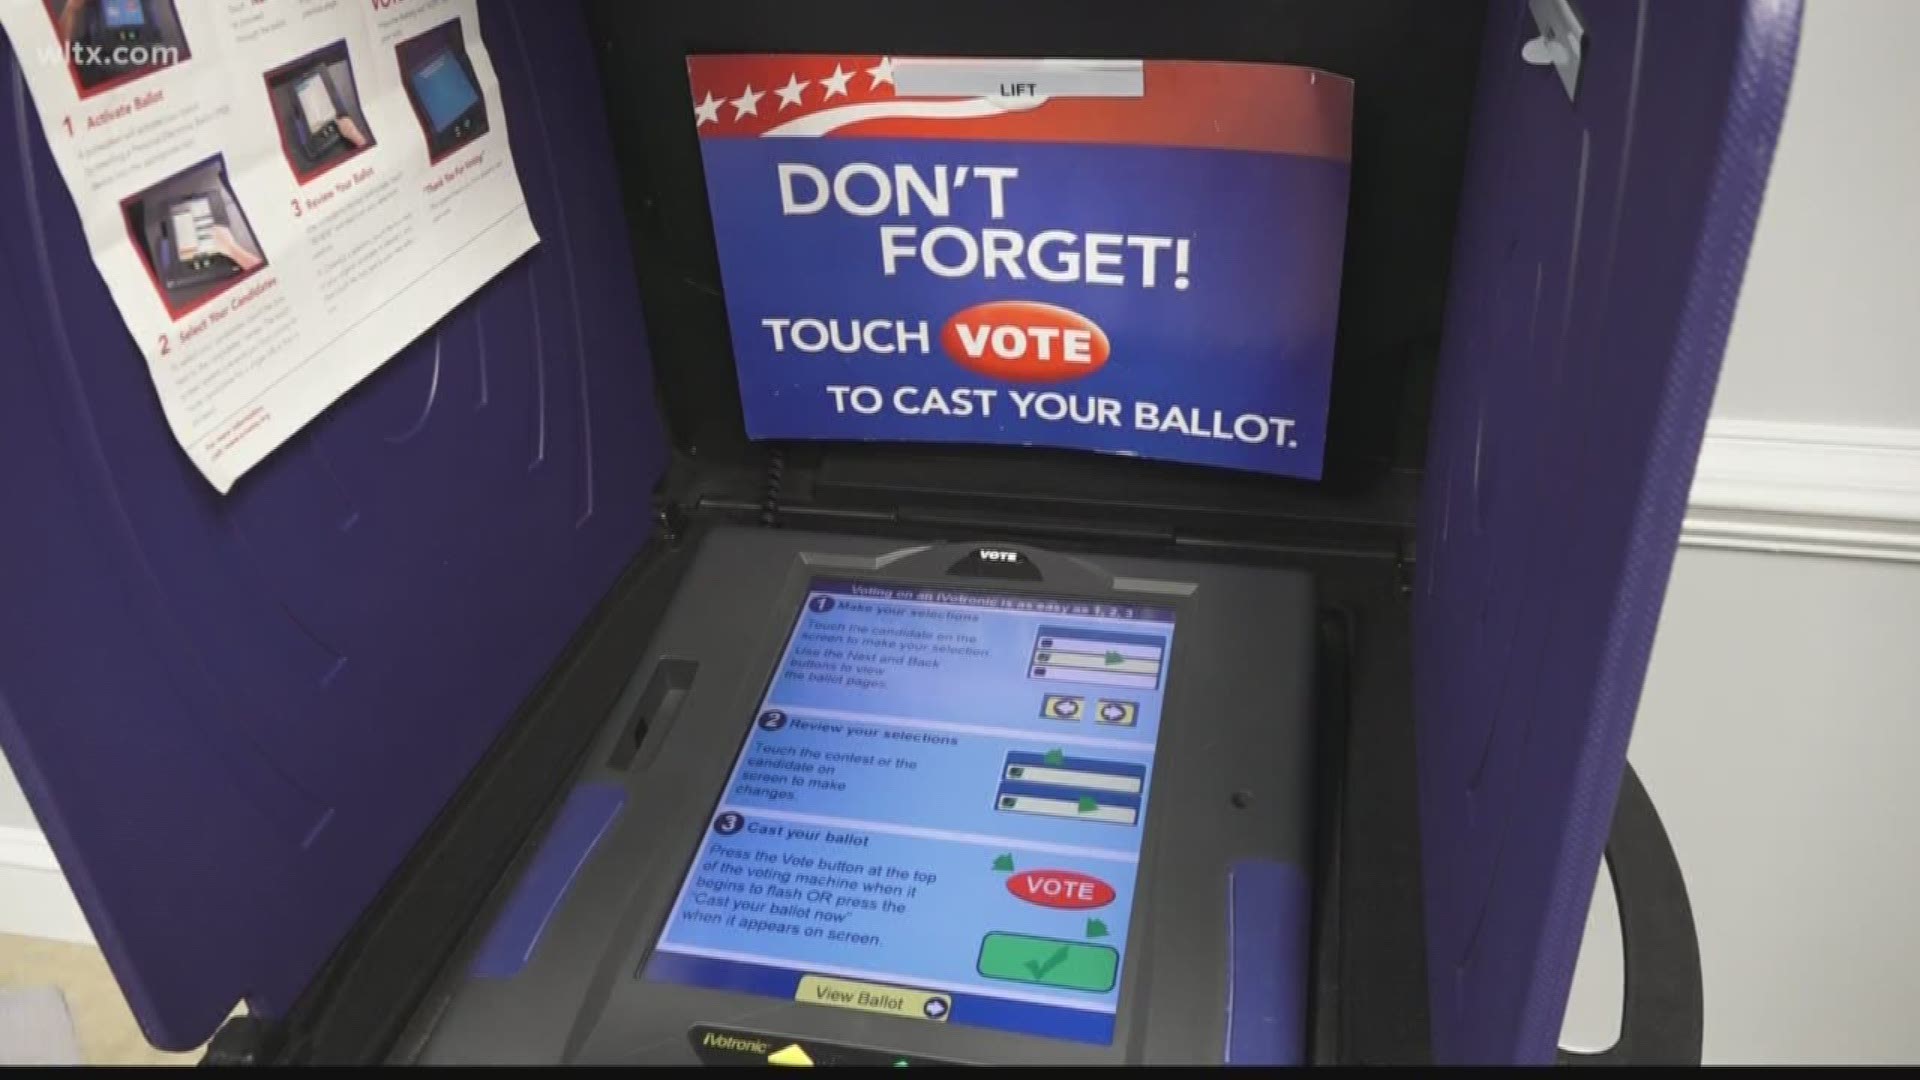 Here is all the latest information you need before you head to the polls on Tuesday